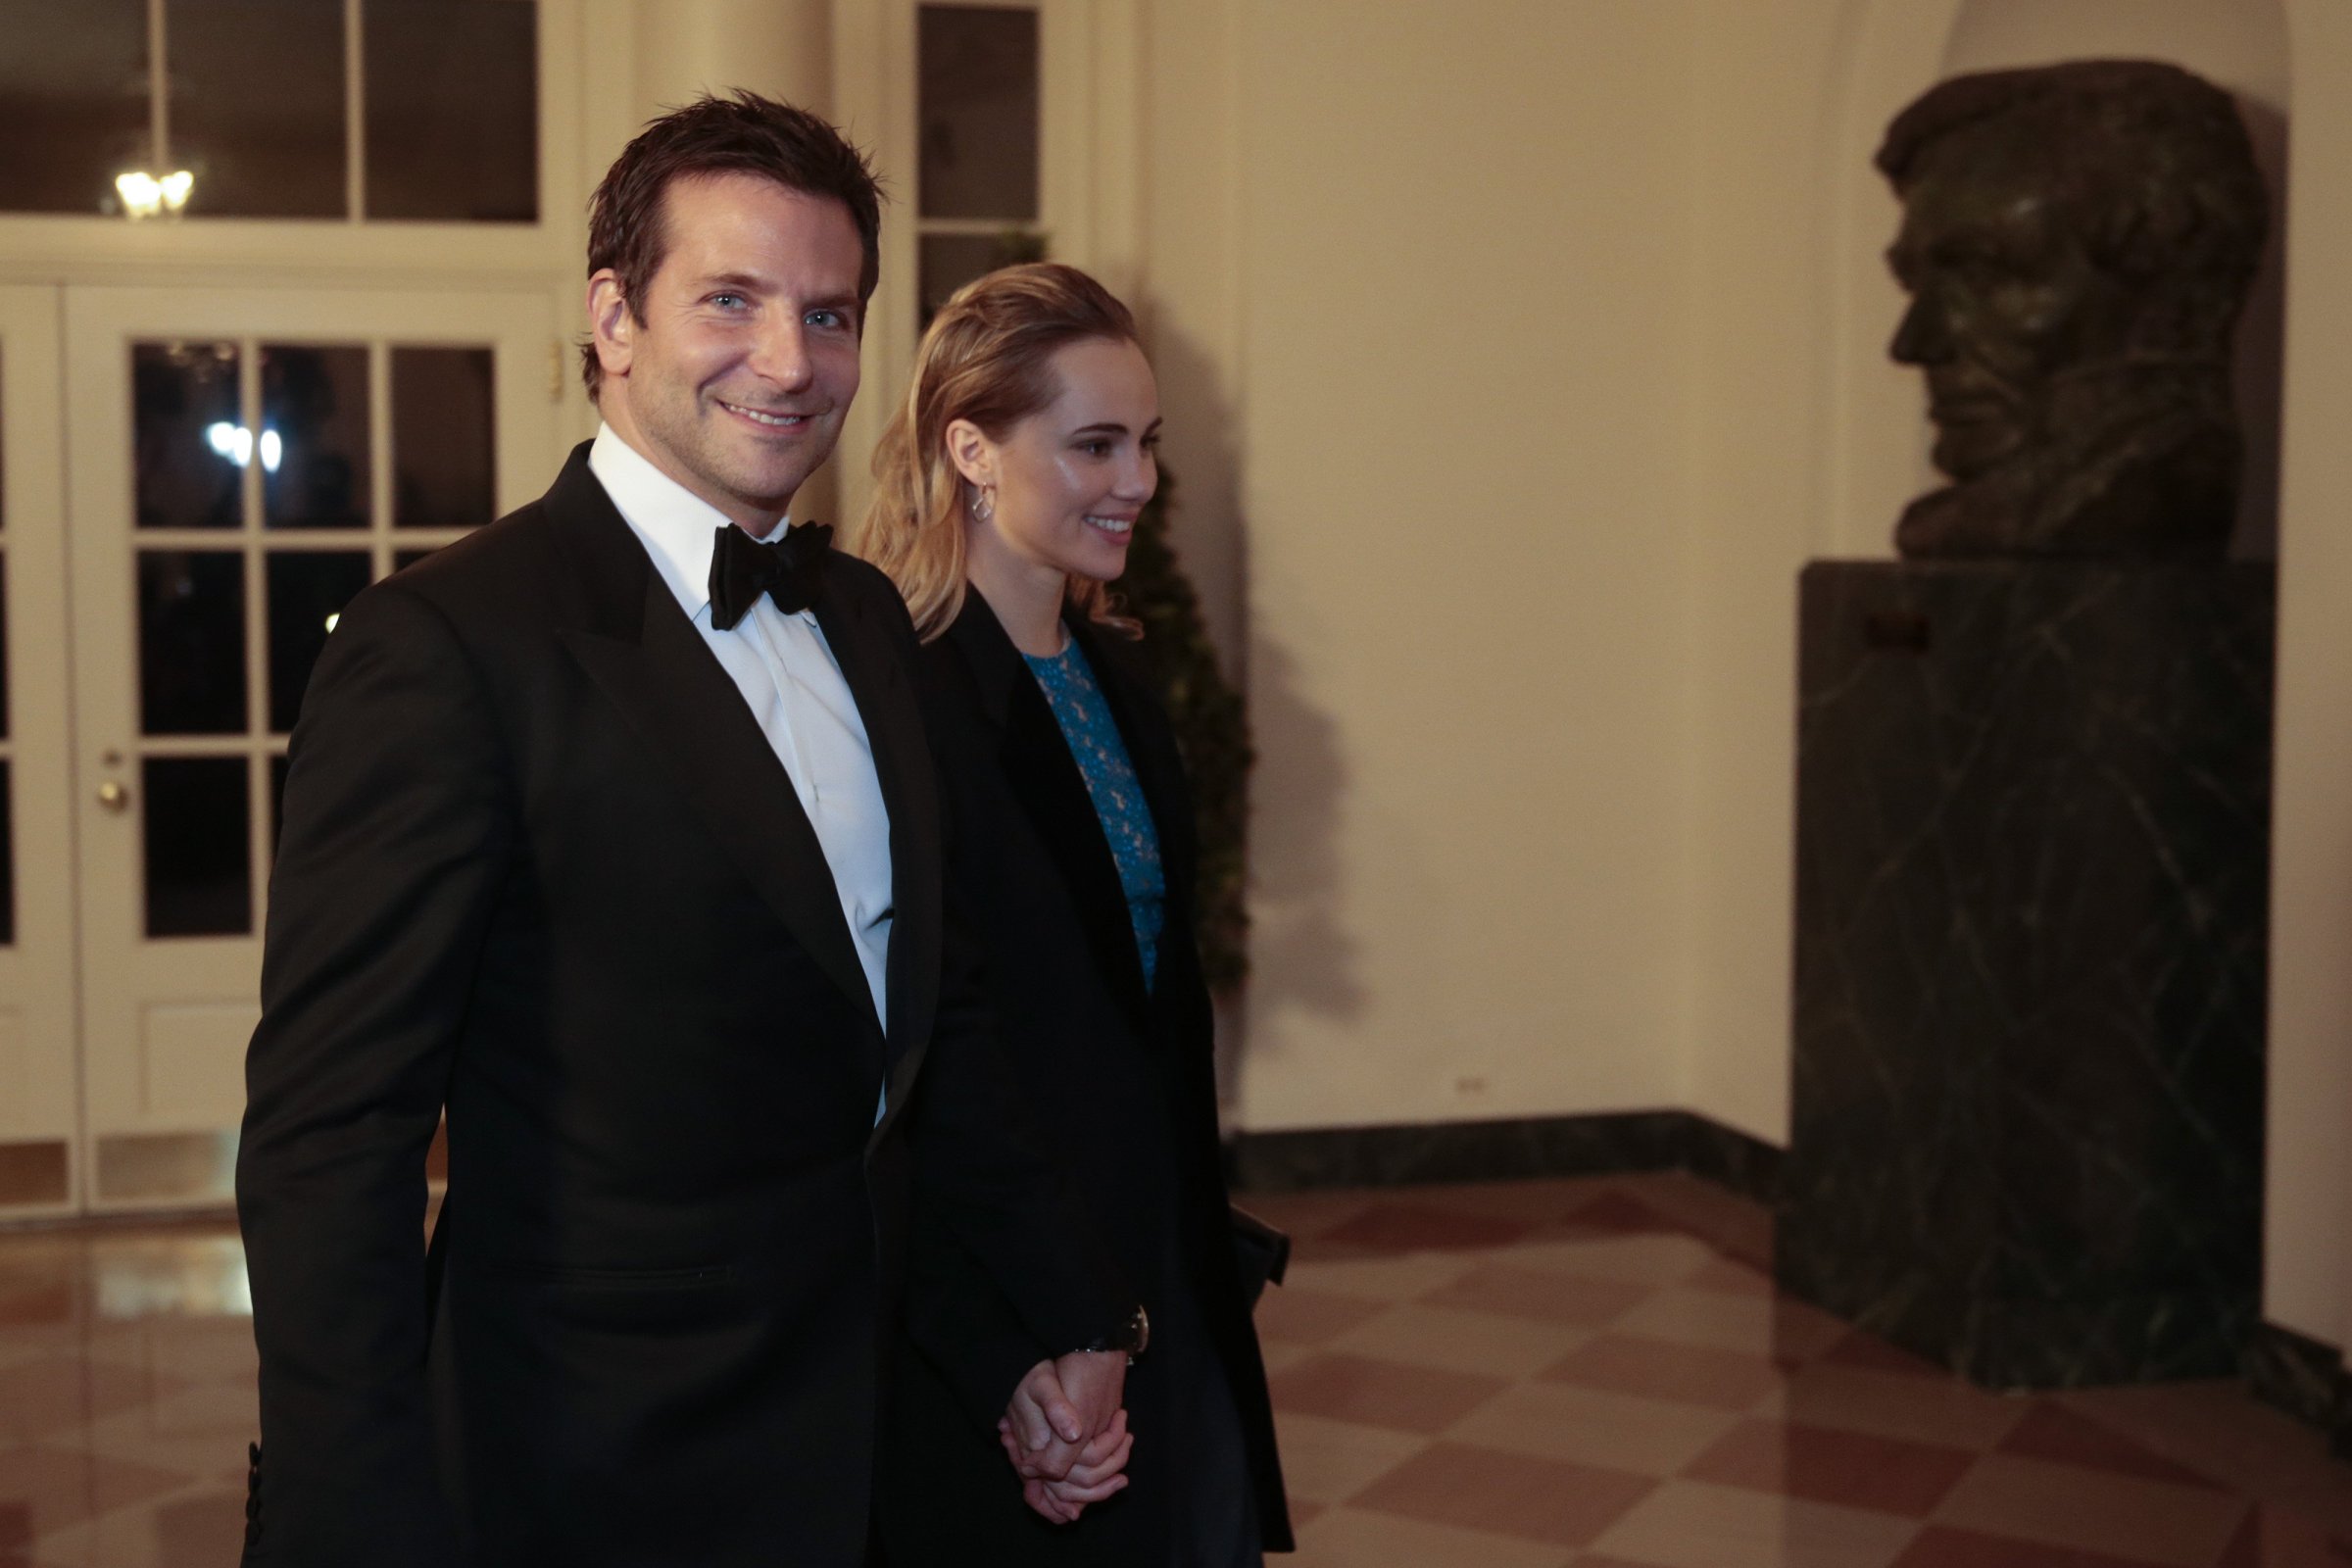 Actor Bradley Cooper, left, and Suki Waterhouse arrive to a state dinner hosted by U.S. President Barack Obama and U.S. first lady Michelle Obama in honor of French President Francois Hollande at the White House on February 11, 2014 in Washington.